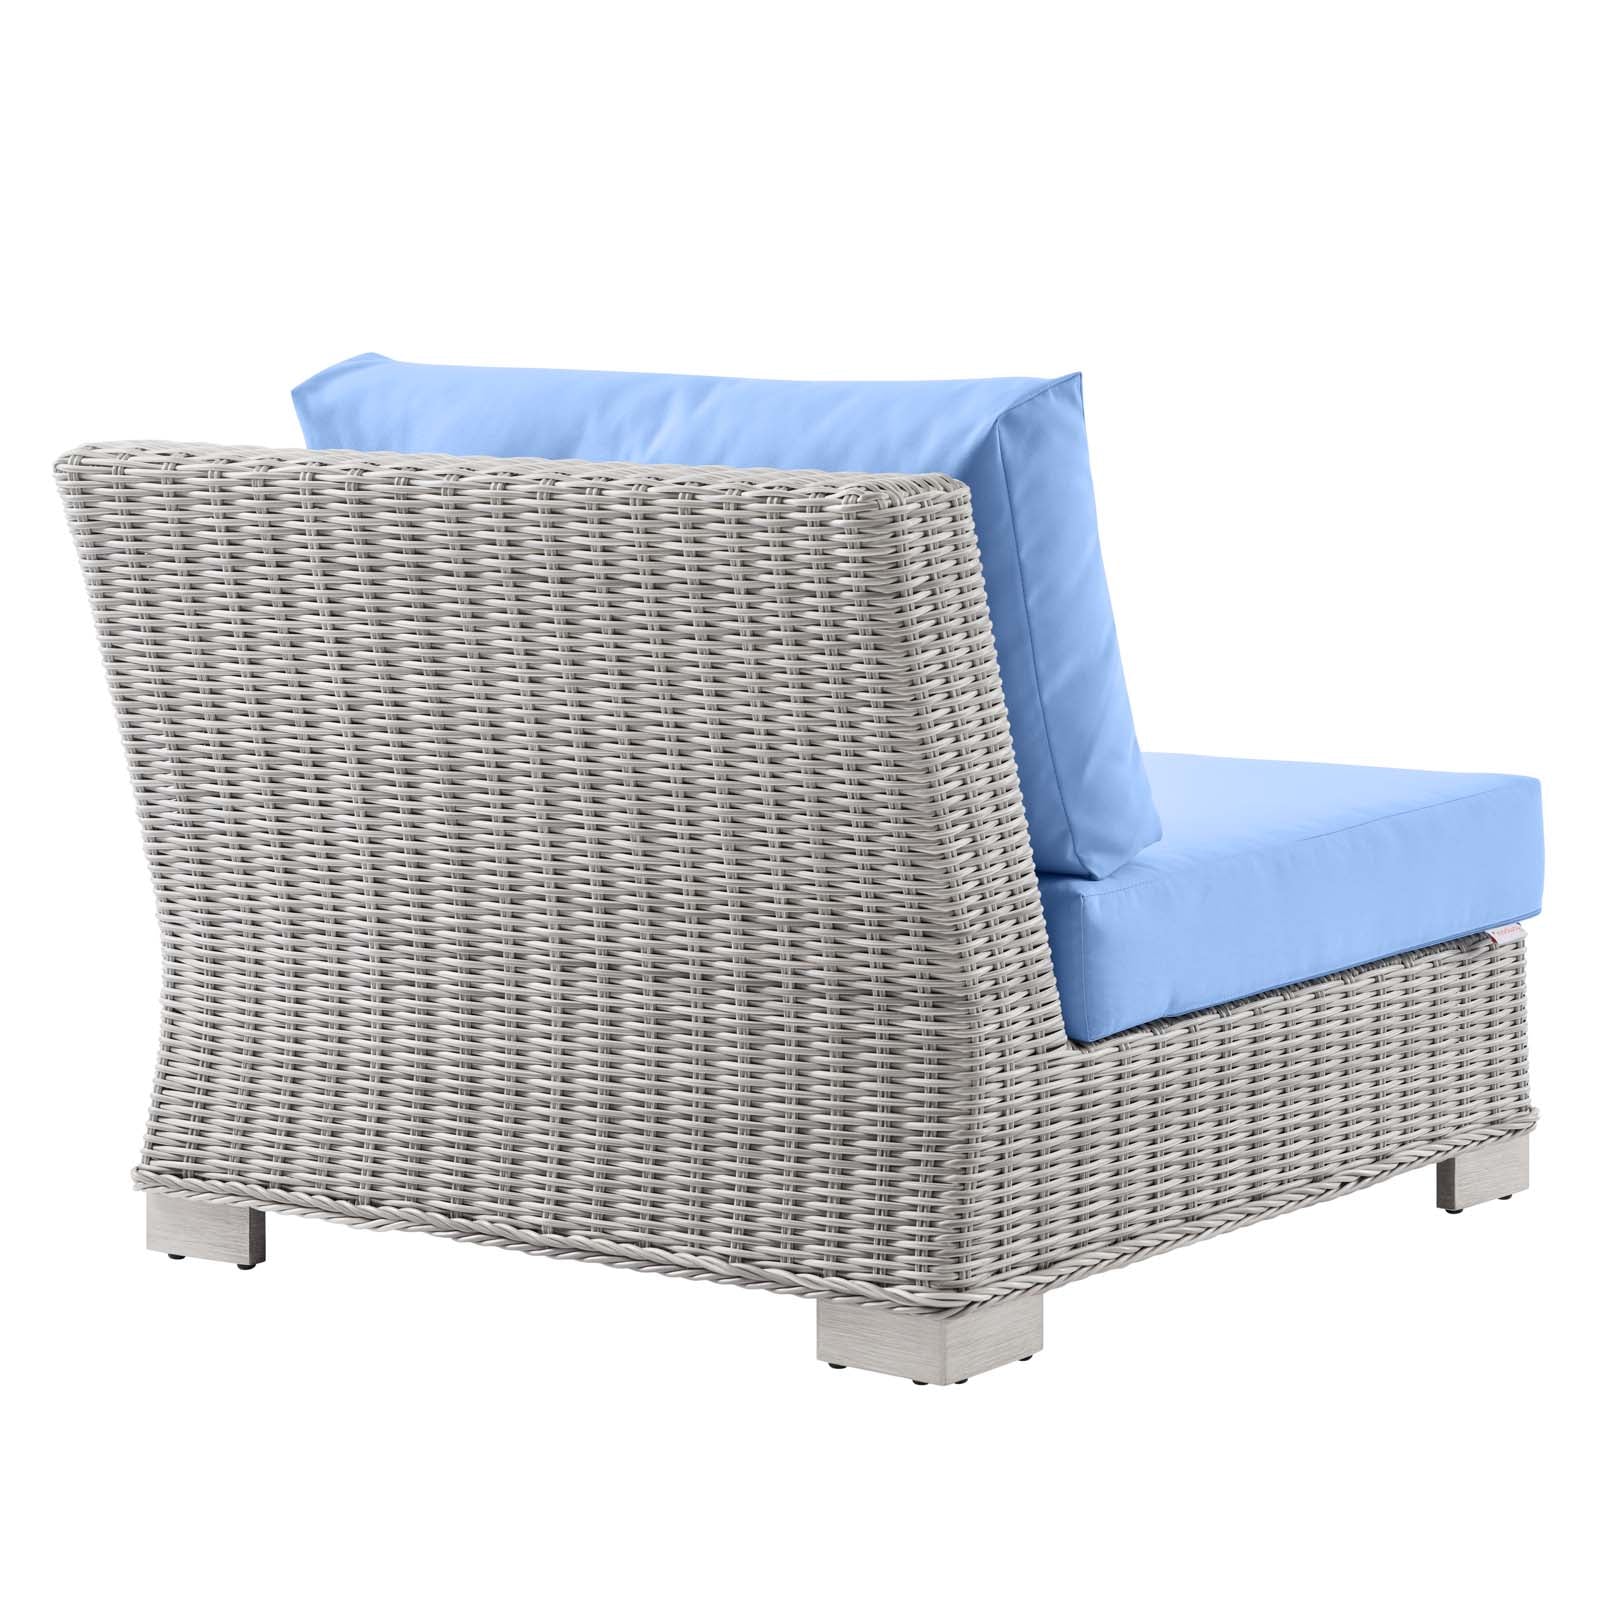 Conway Outdoor Patio Wicker Rattan Right-Arm Chair